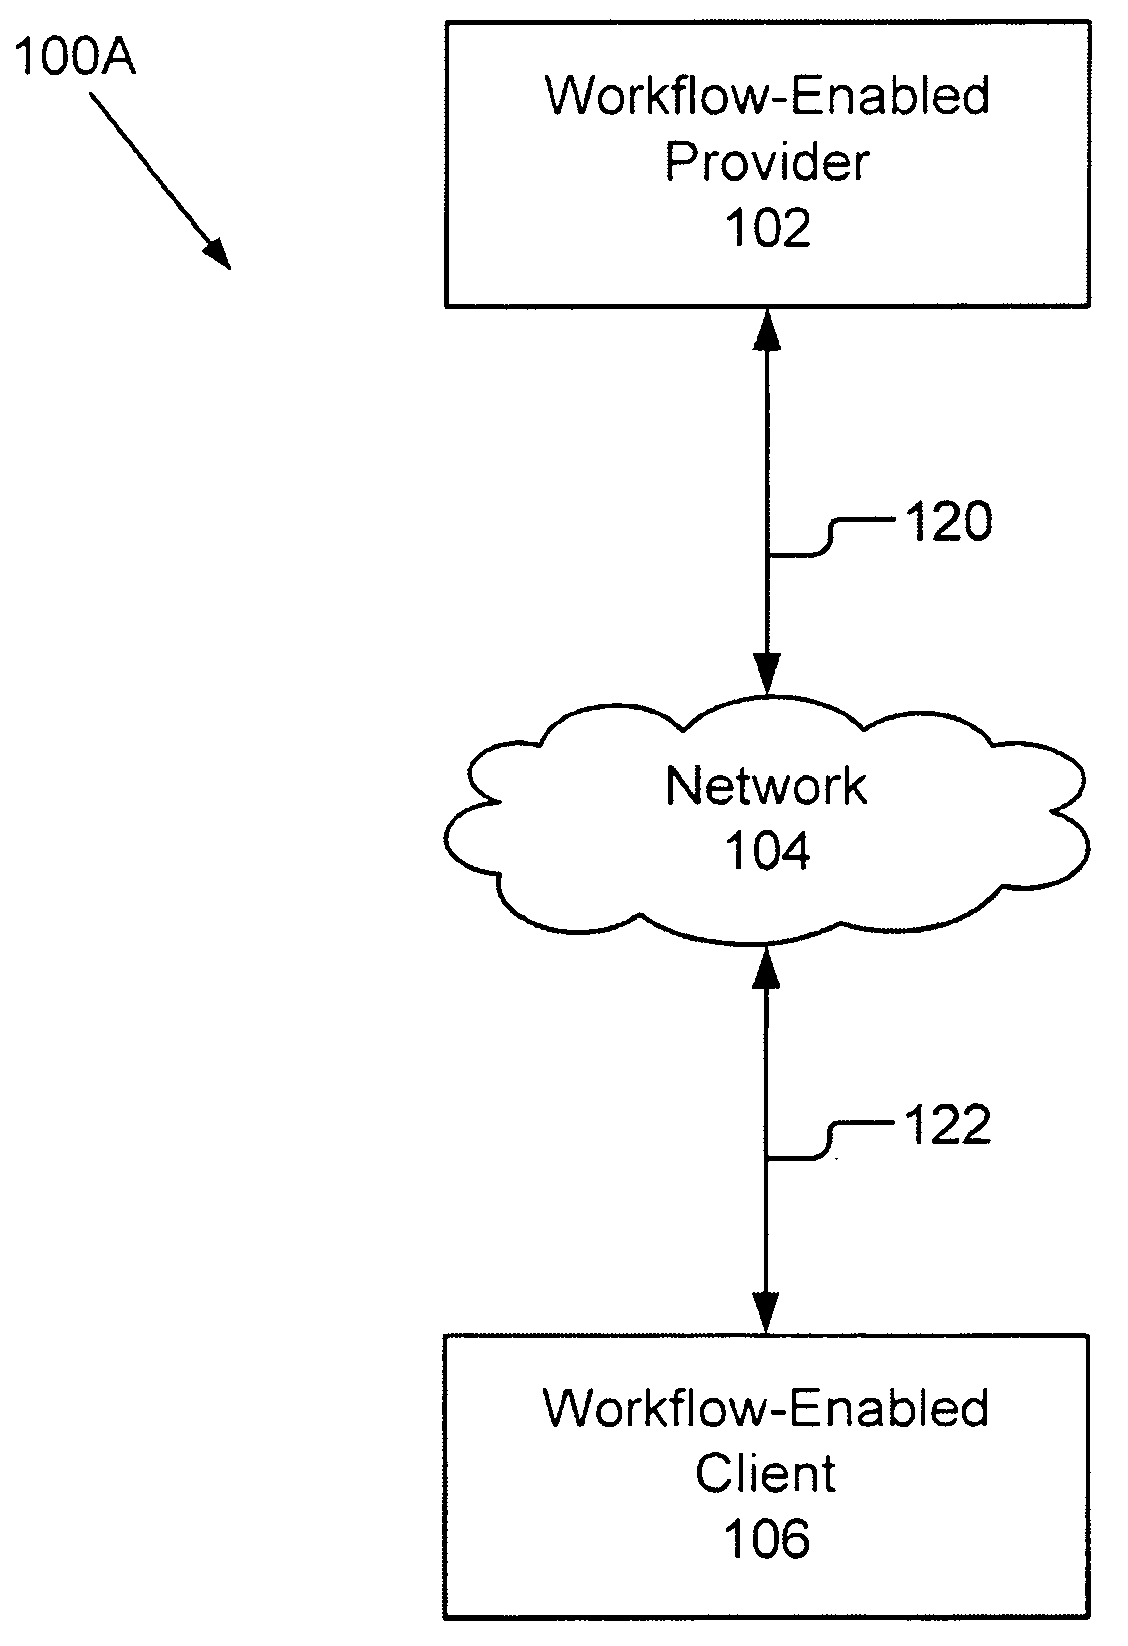 Workflow Manager For A Distributed System